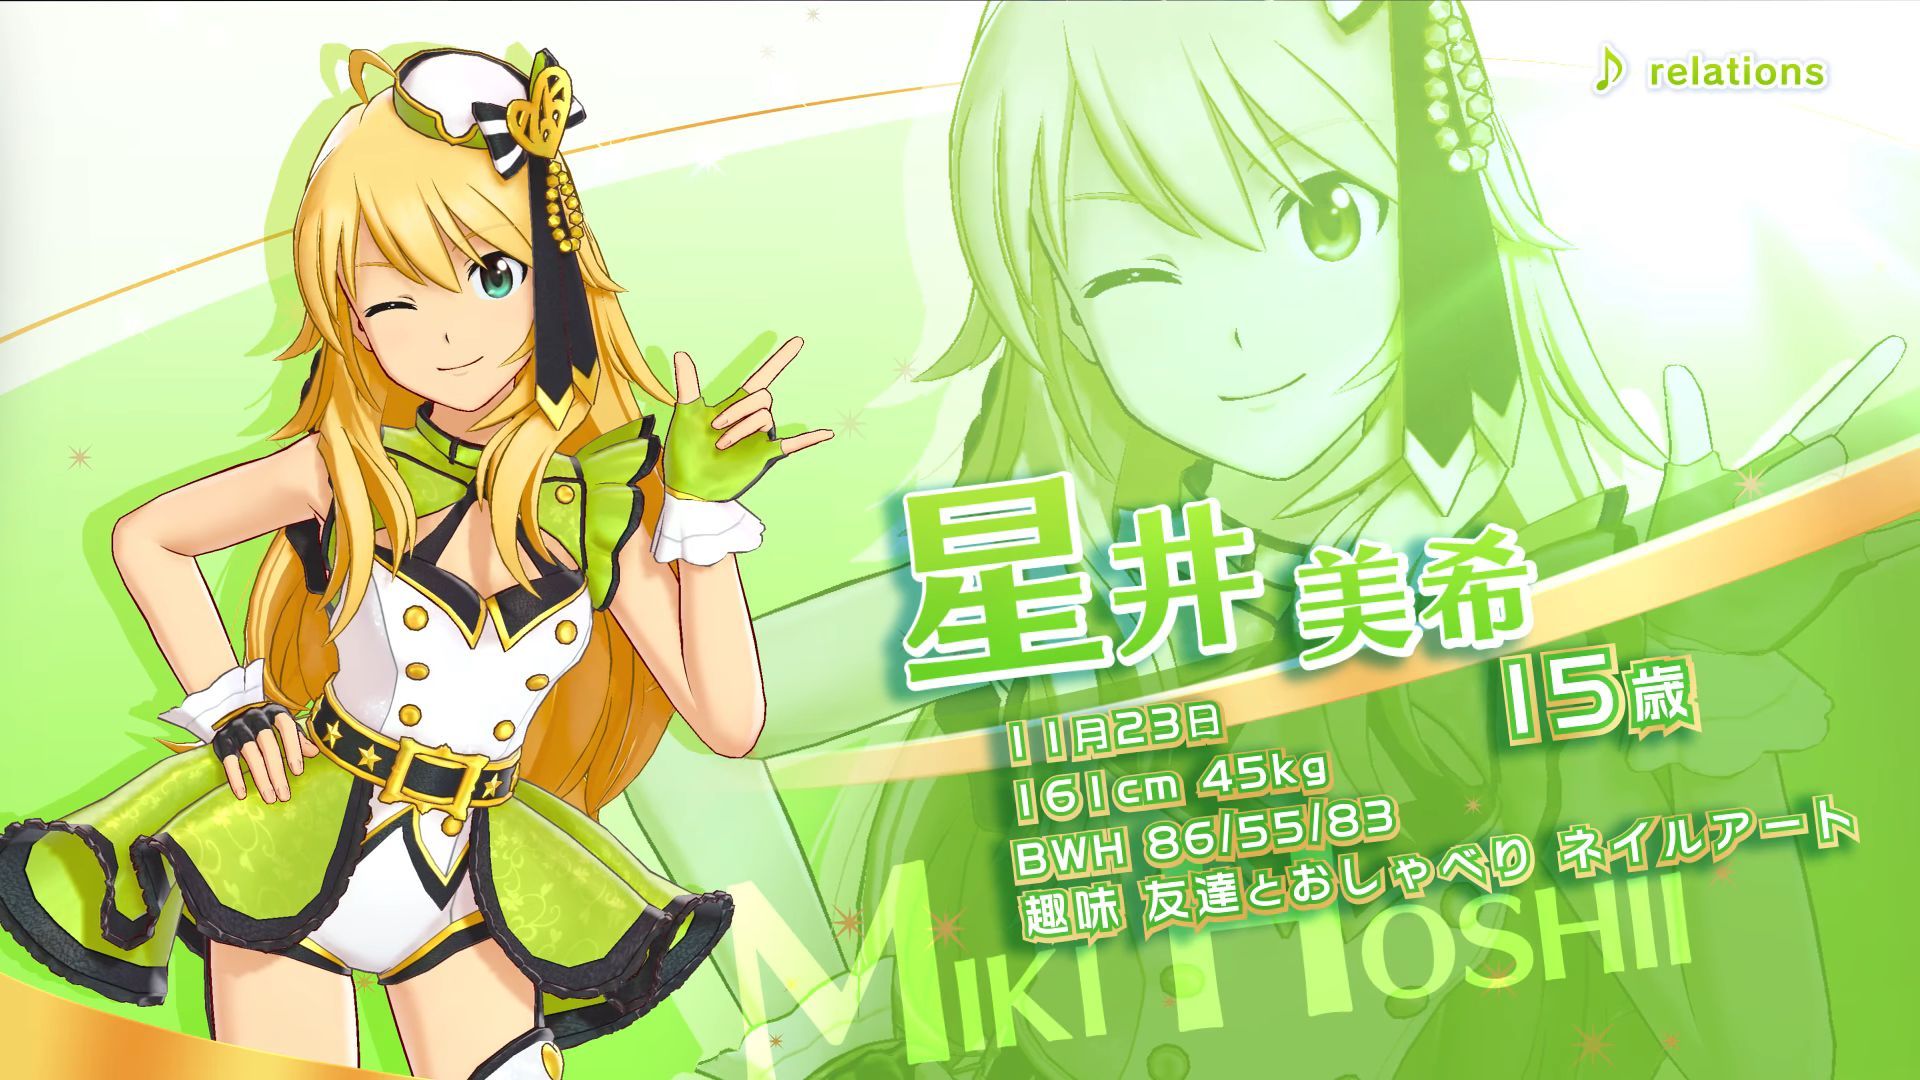 Ps4 Exclusive The Idolmaster Stella Stage Gets New Trailer Starring Miki Hoshii